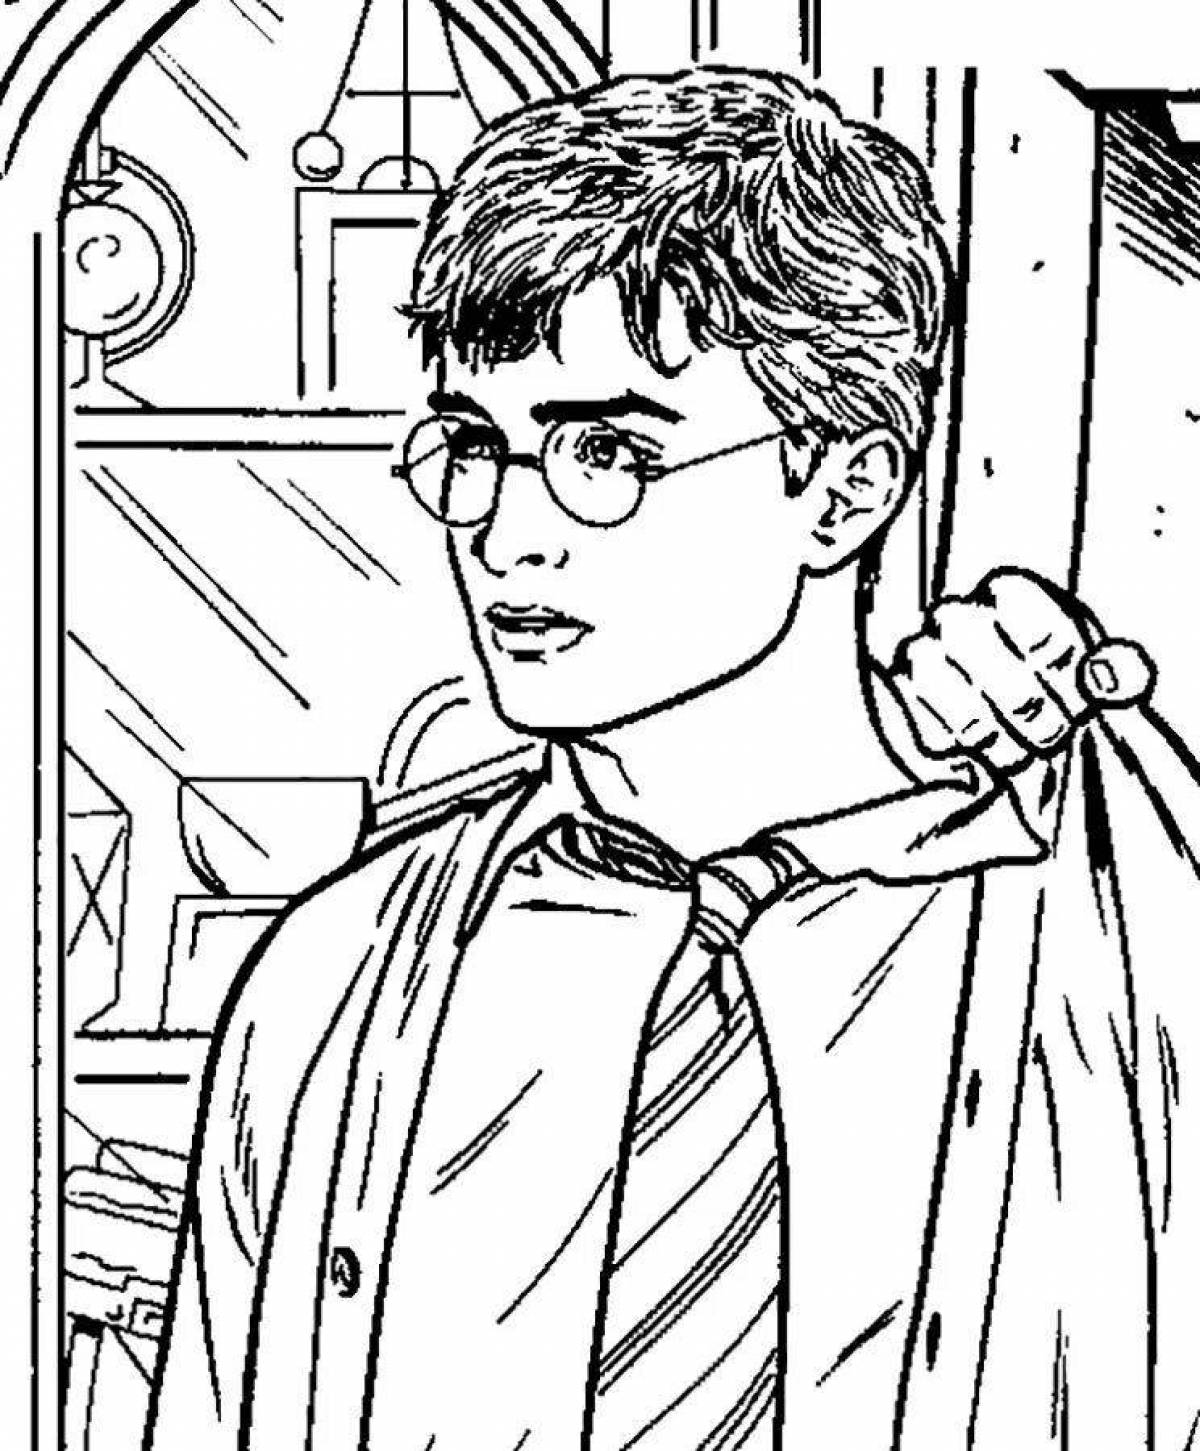 Harry Potter in good quality #9